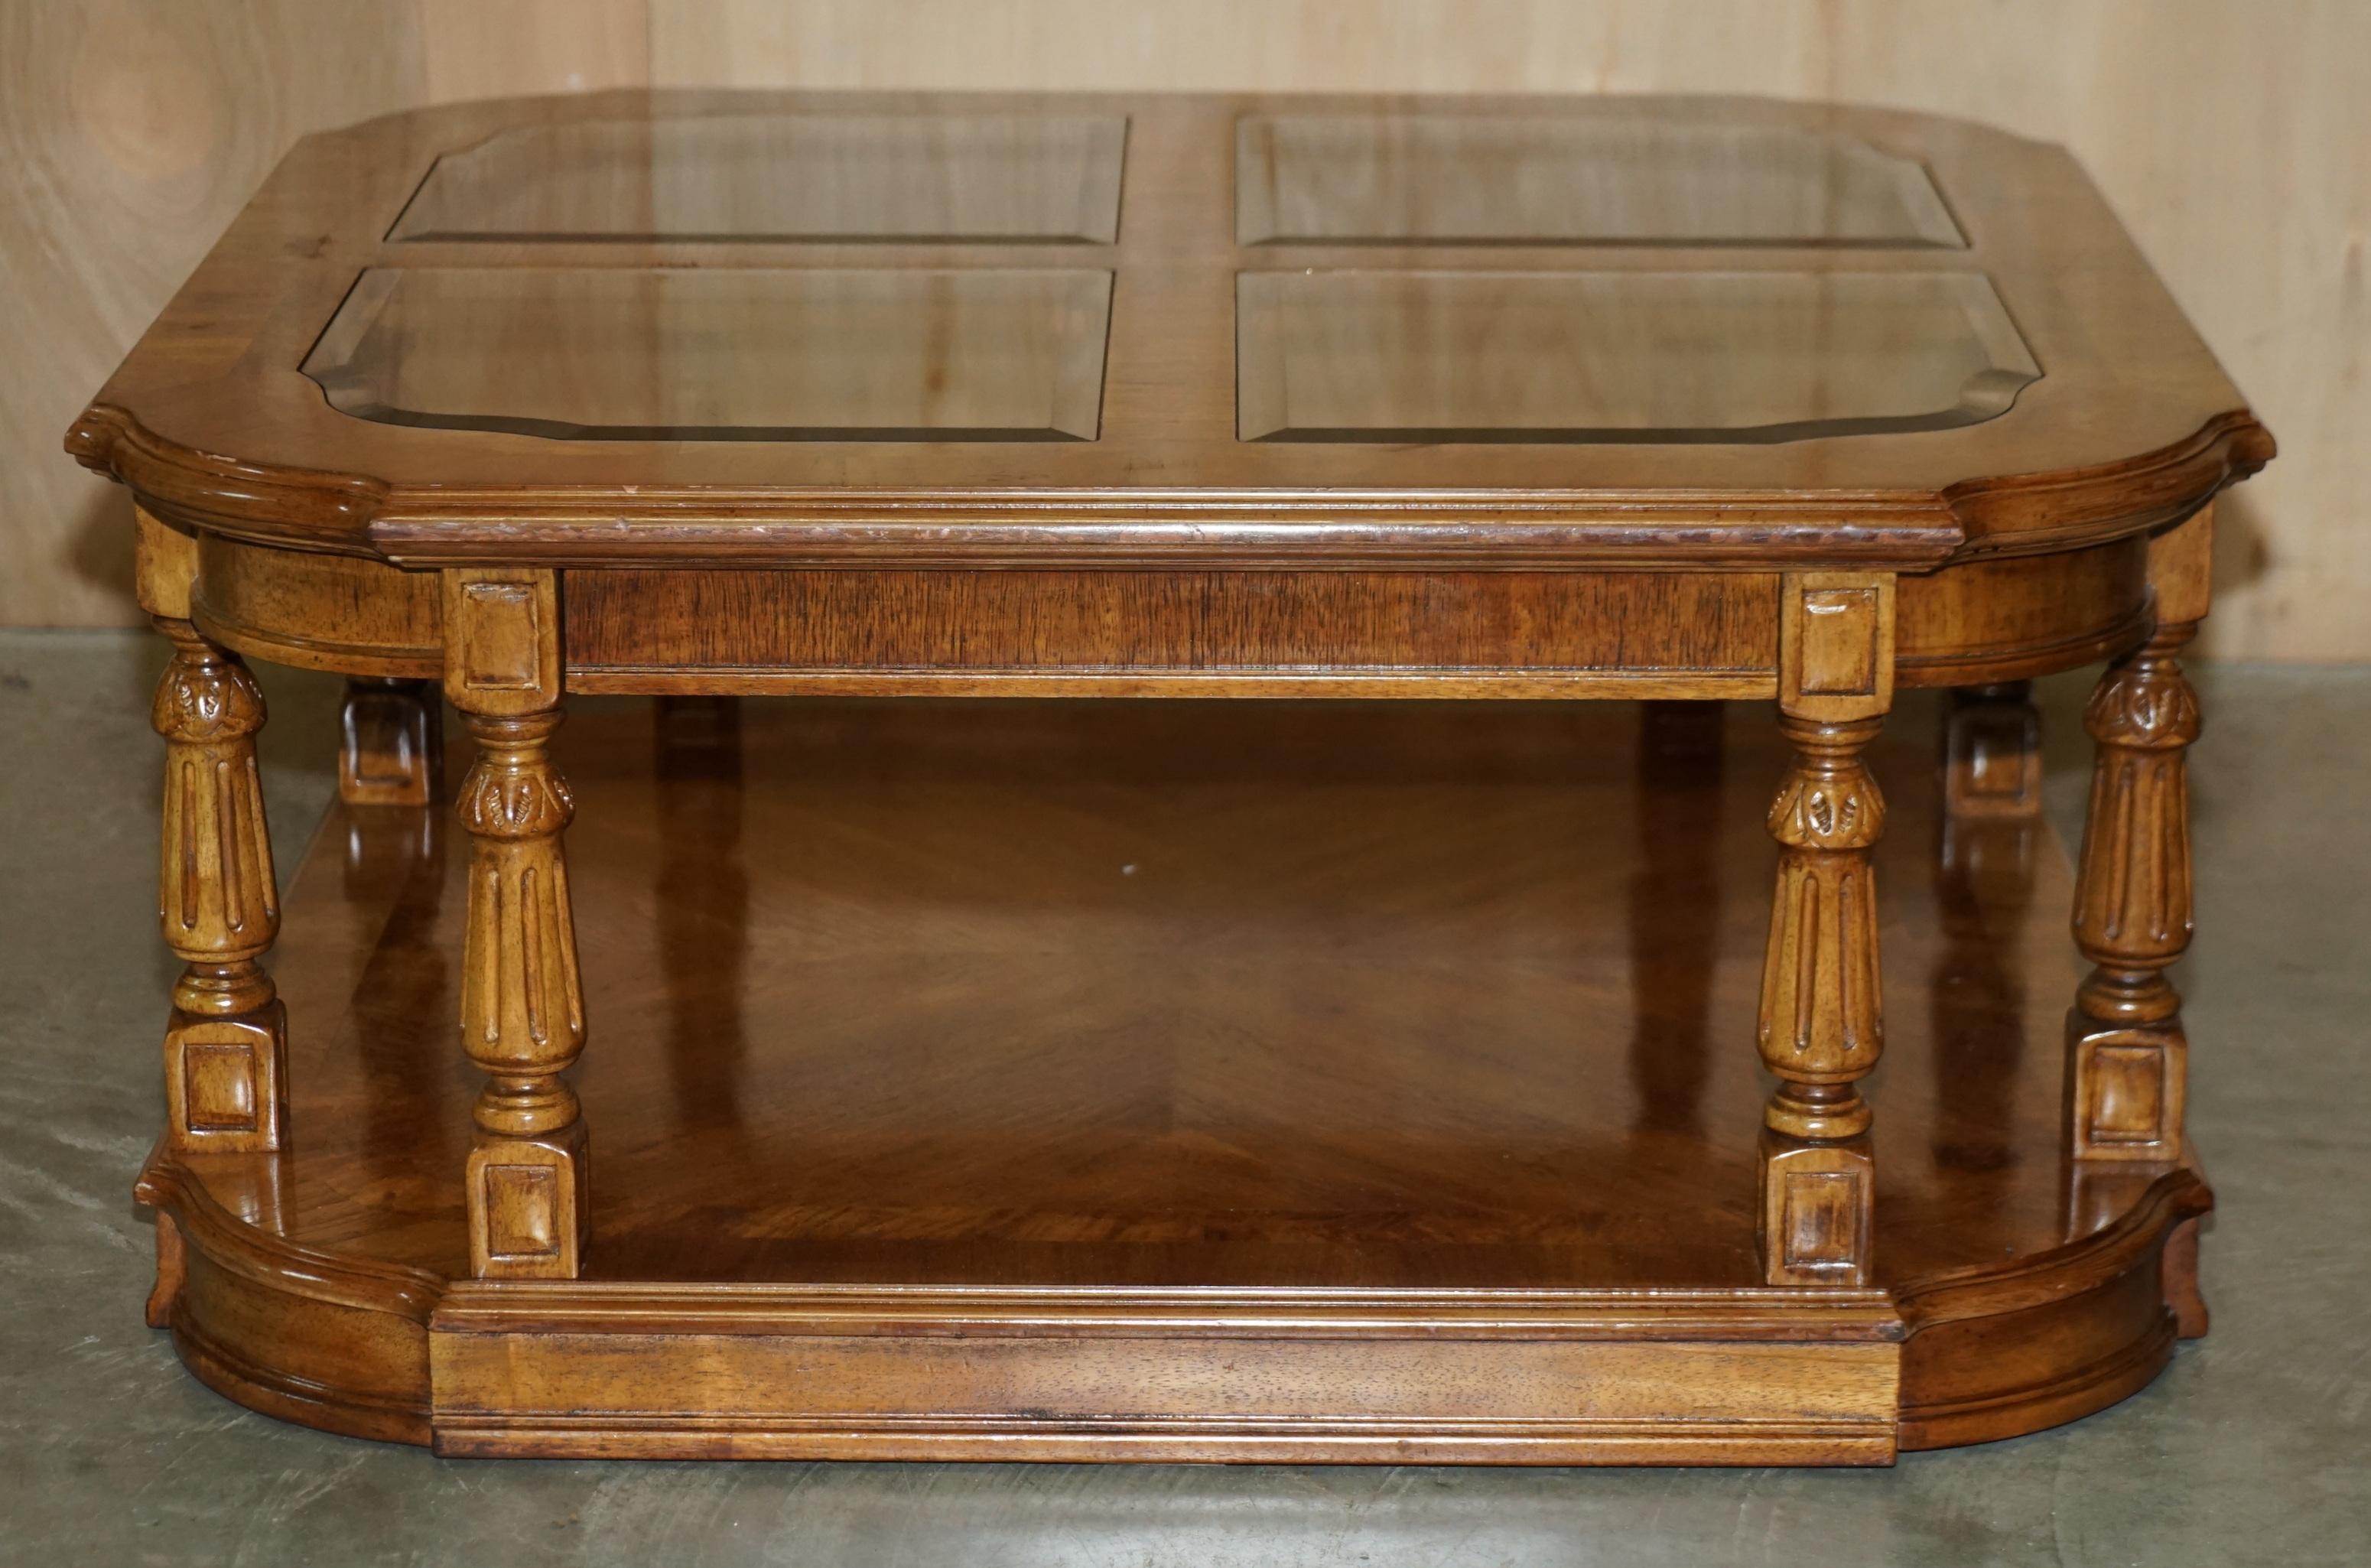 English Sublime Burr Walnut with Glass Tops Large Coffee Cocktail Table Part of Suite